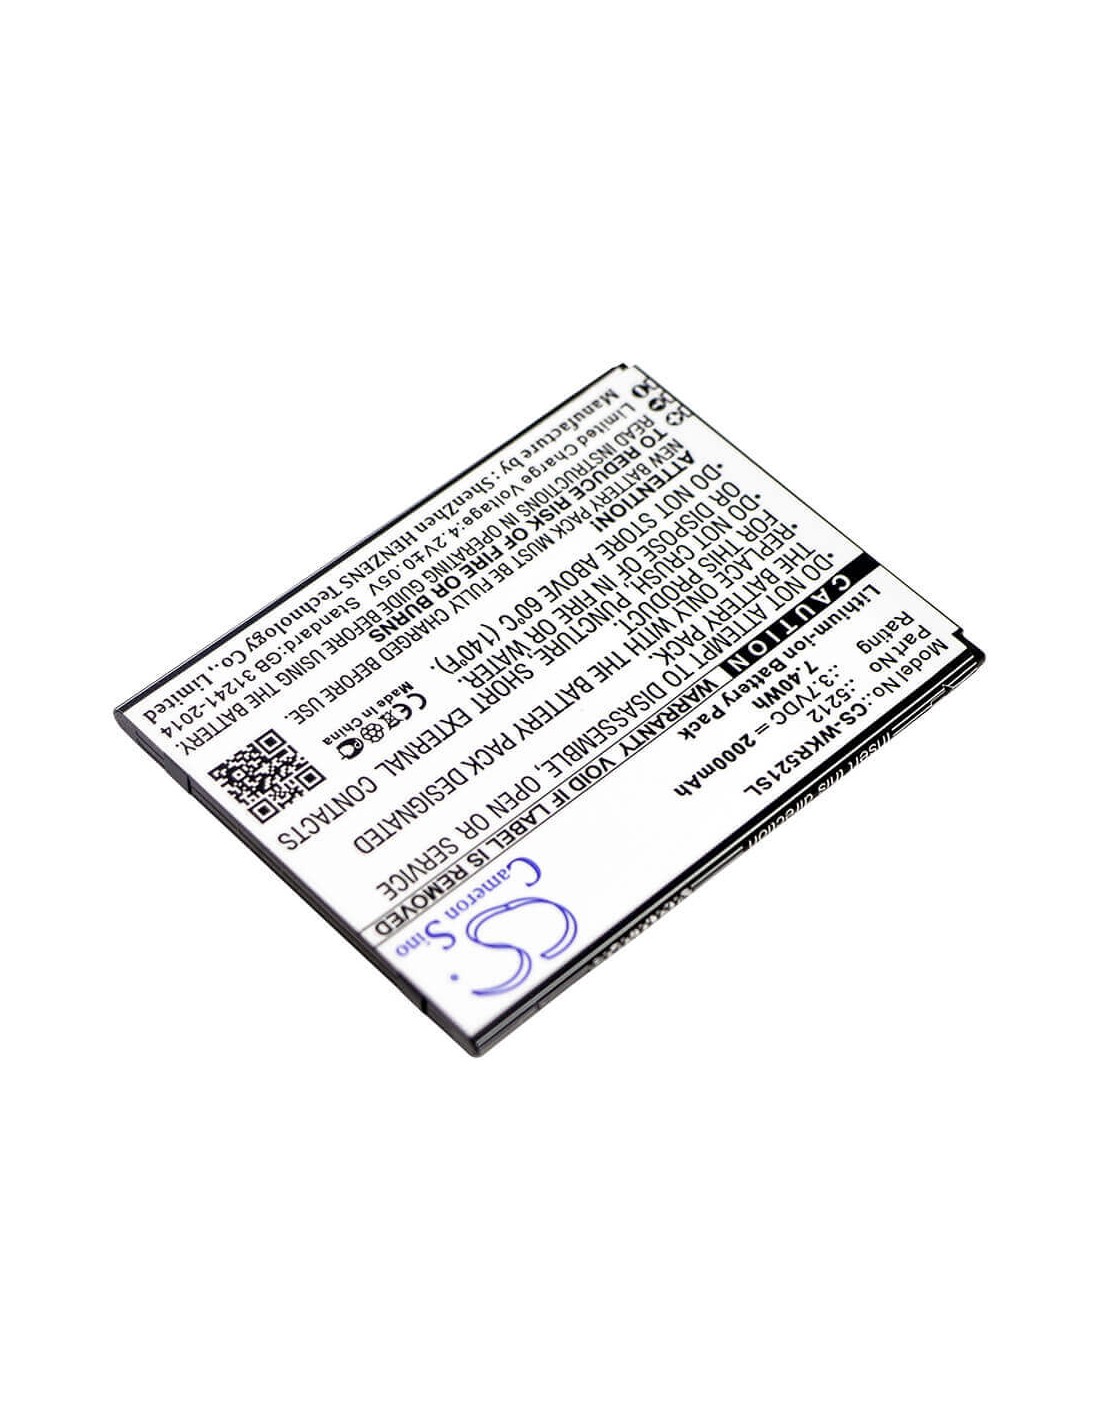 Battery for Wiko, Robby 3.7V, 2000mAh - 7.40Wh